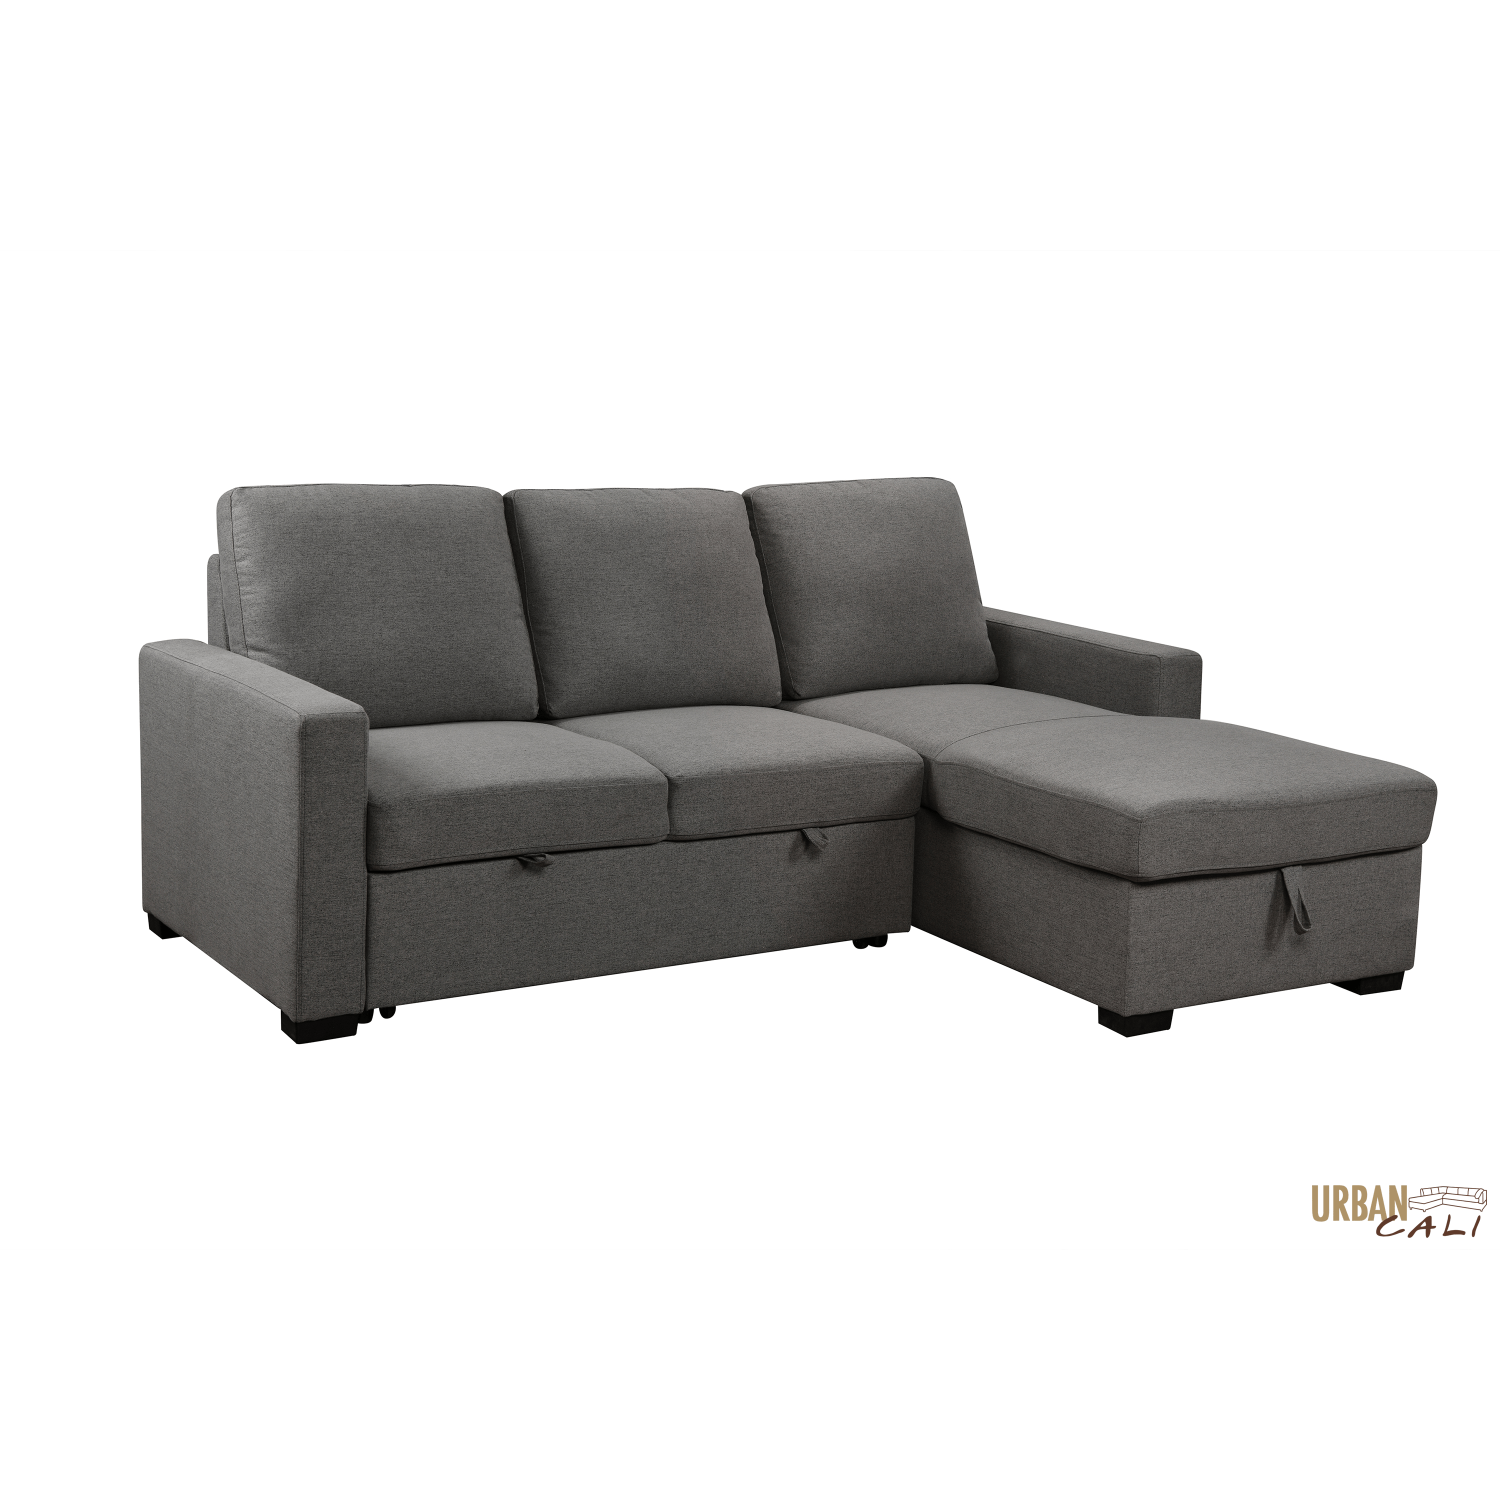 Urban Cali Sausalito Sleeper Sectional Sofa Bed with Right Storage Chaise in Solis Dark Grey